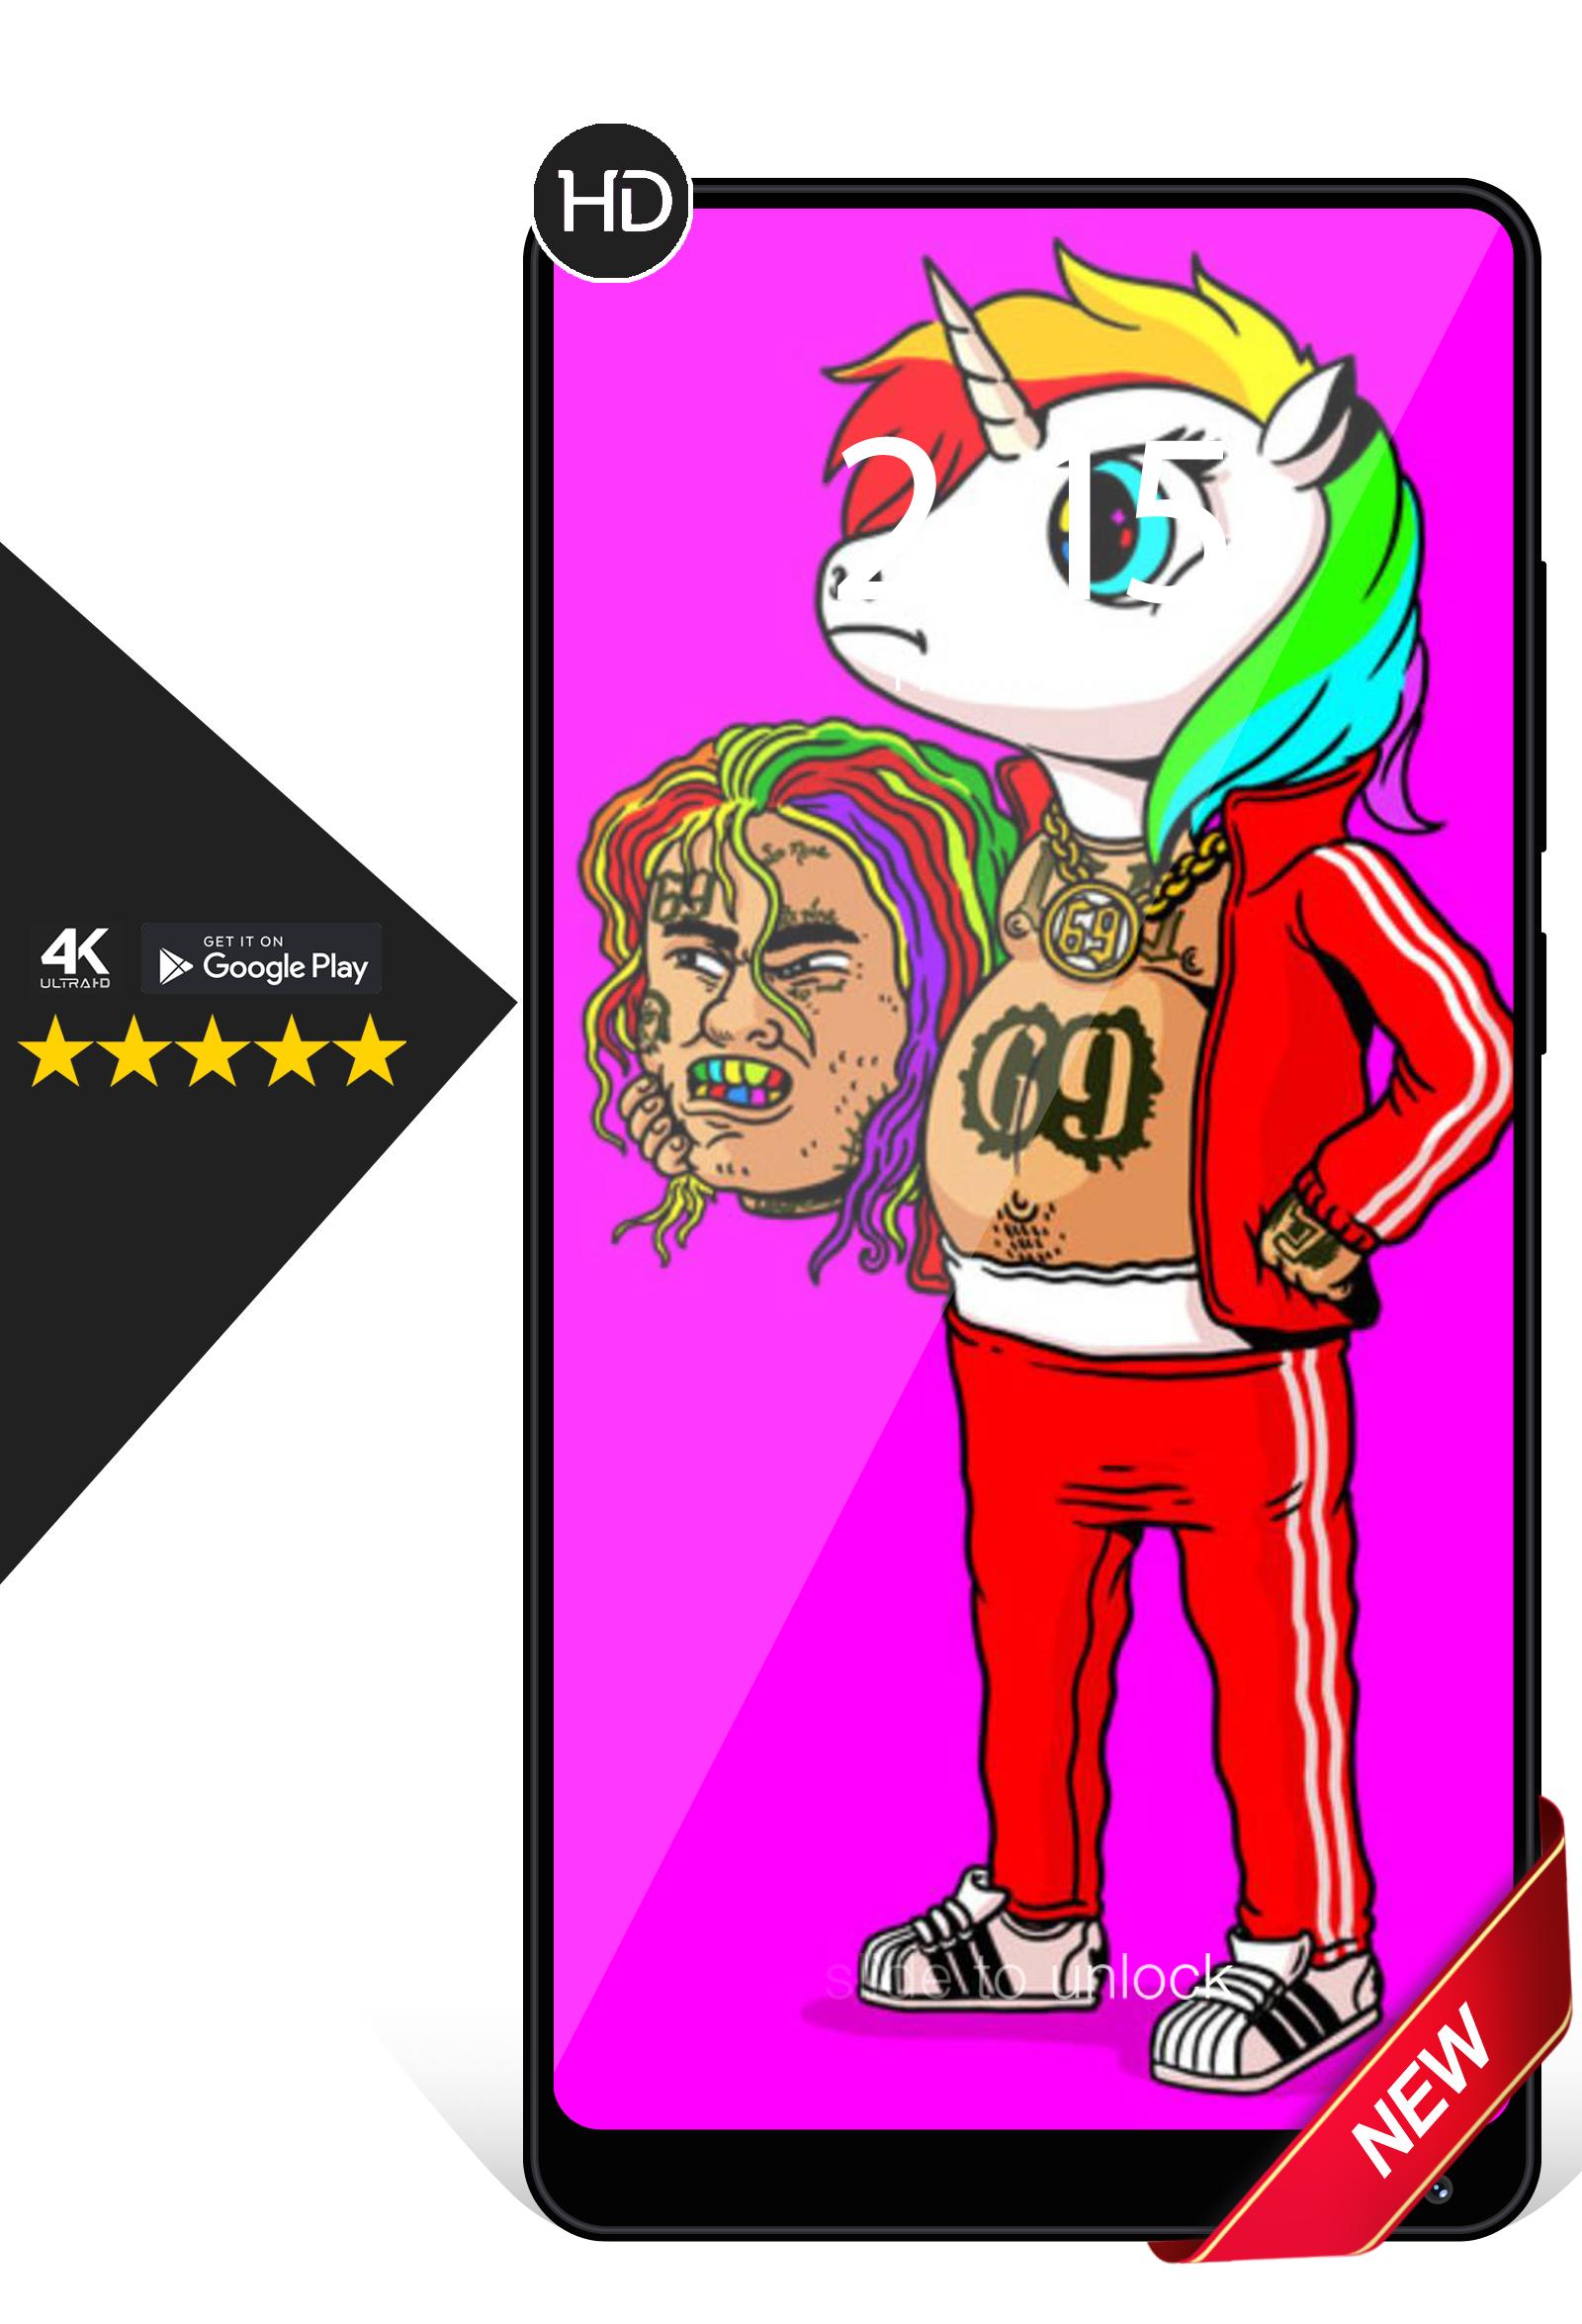 Best 6ix9ine Wallpapers Hd For Android Apk Download